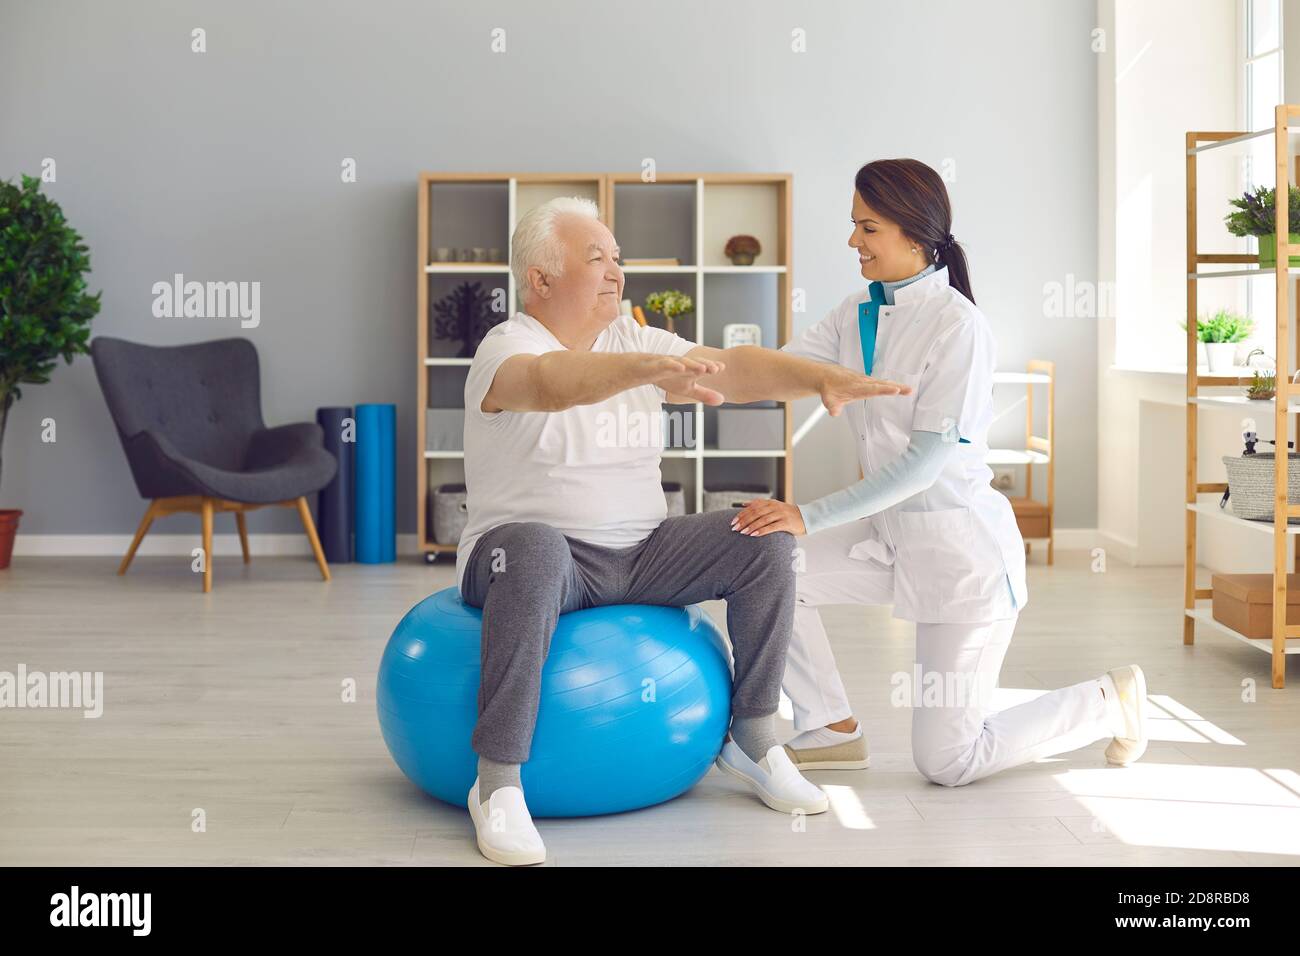 Smiling woman chiropractor correcting old man movements during rehabilitation theapy on fitness ball Stock Photo